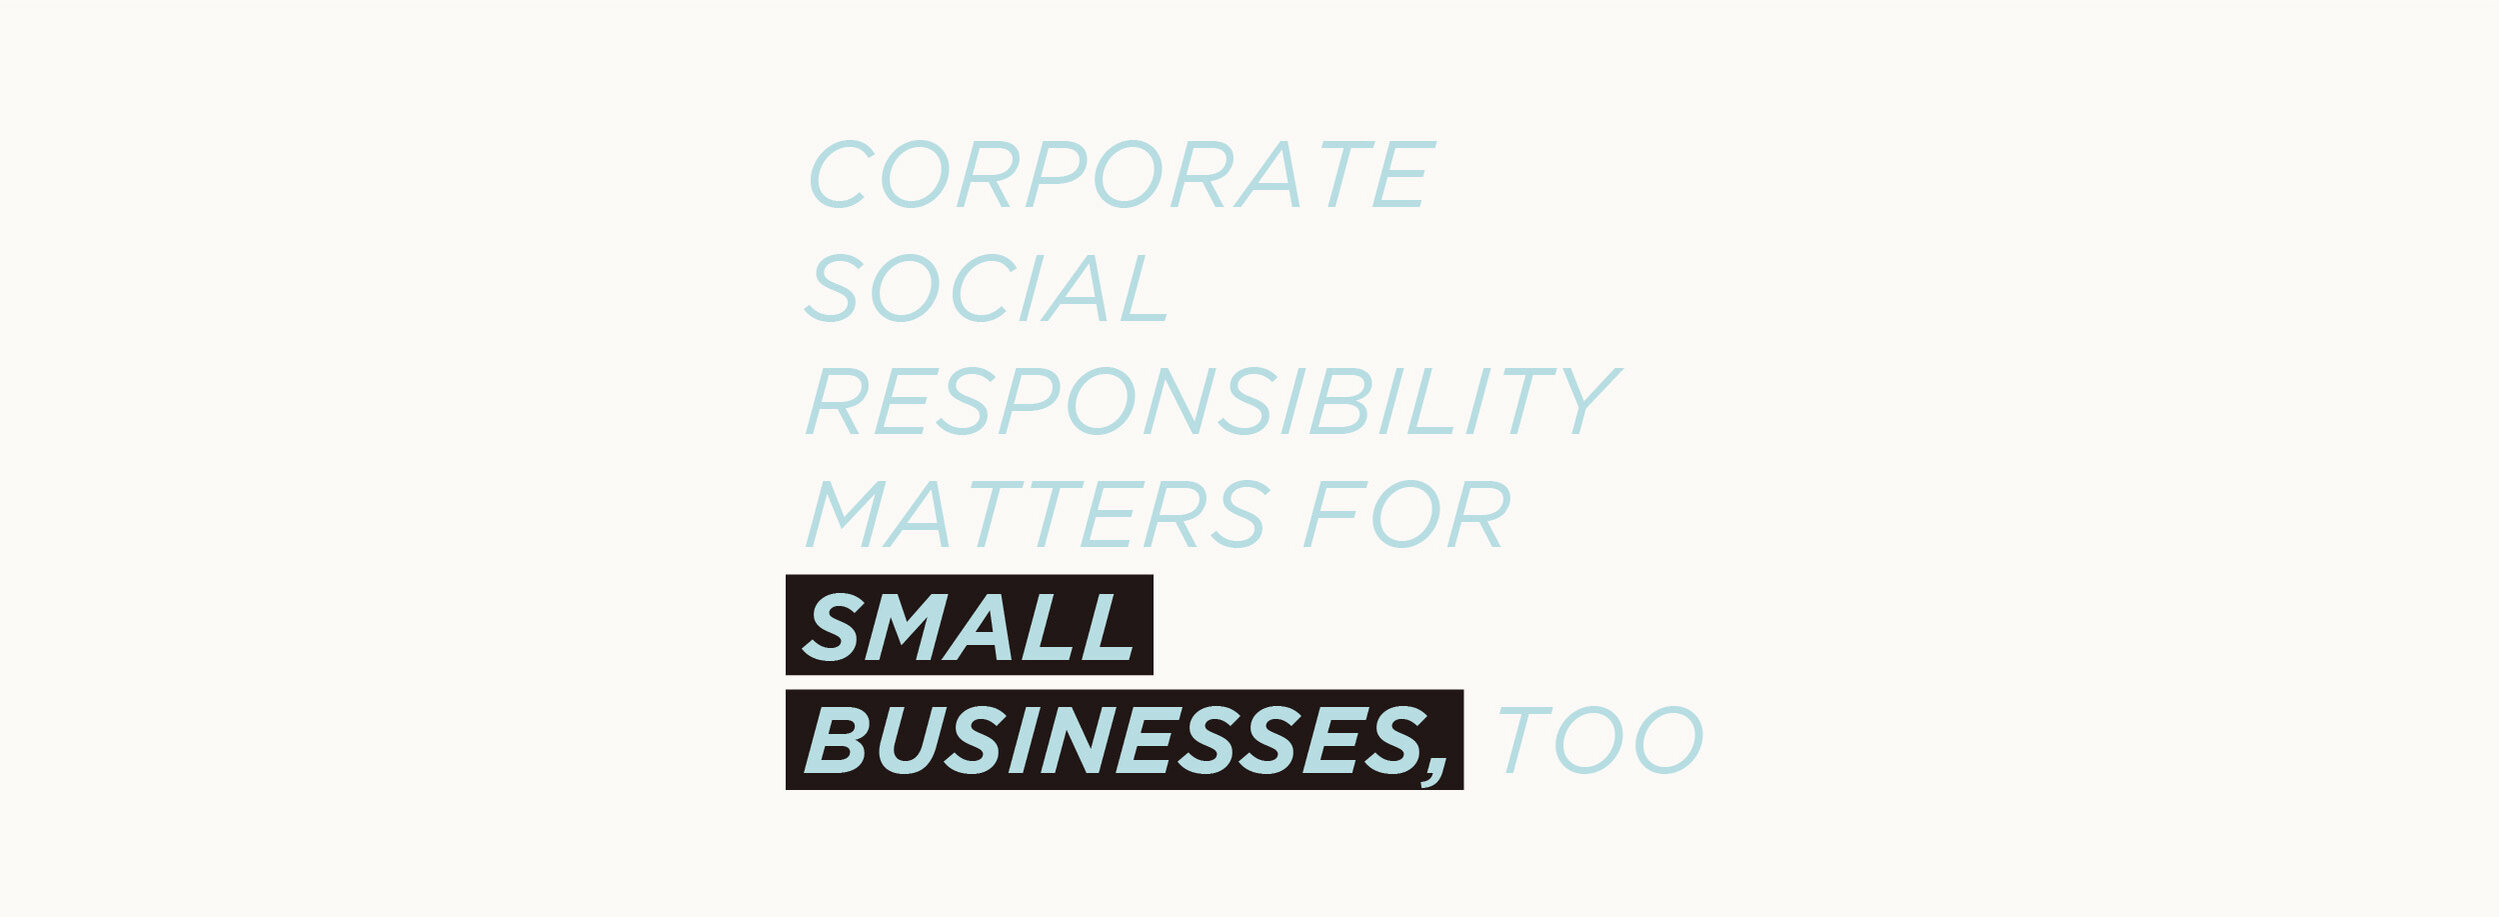 Social responsibility for small businesses